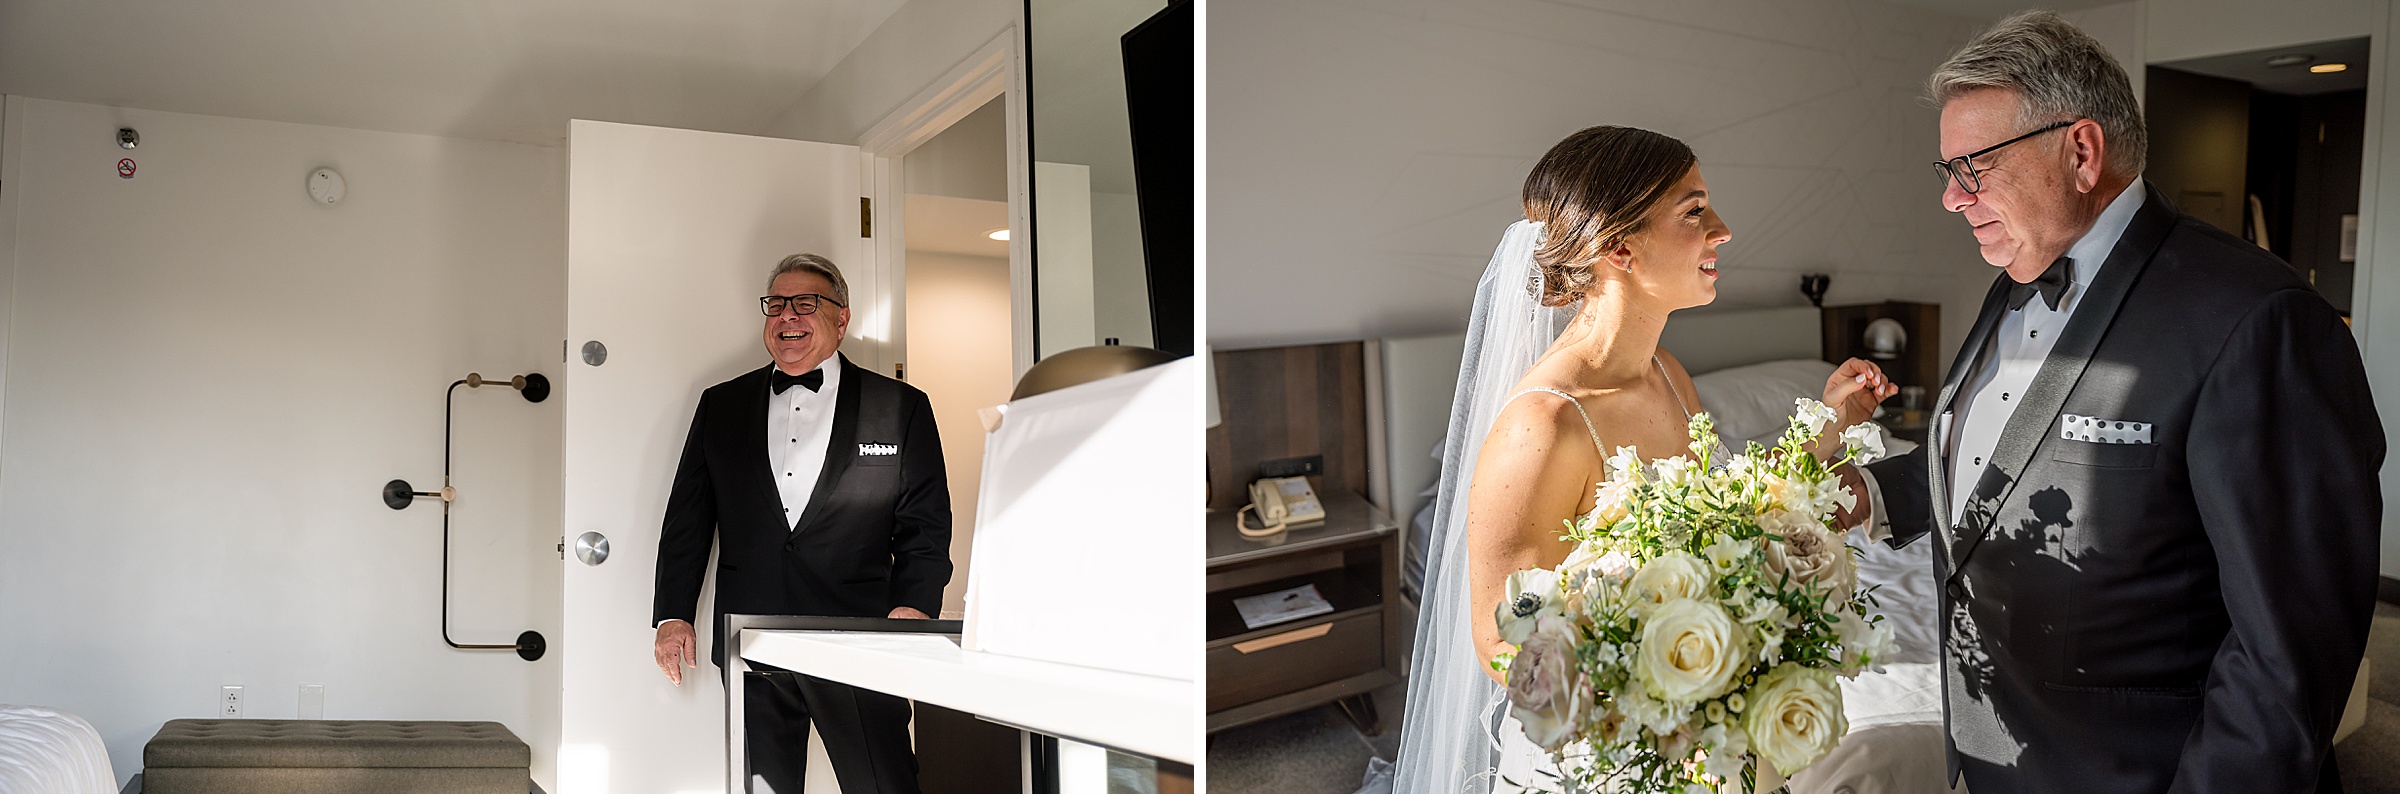 At a Lilah Events wedding, the bride and her father both don stylish tuxedos.